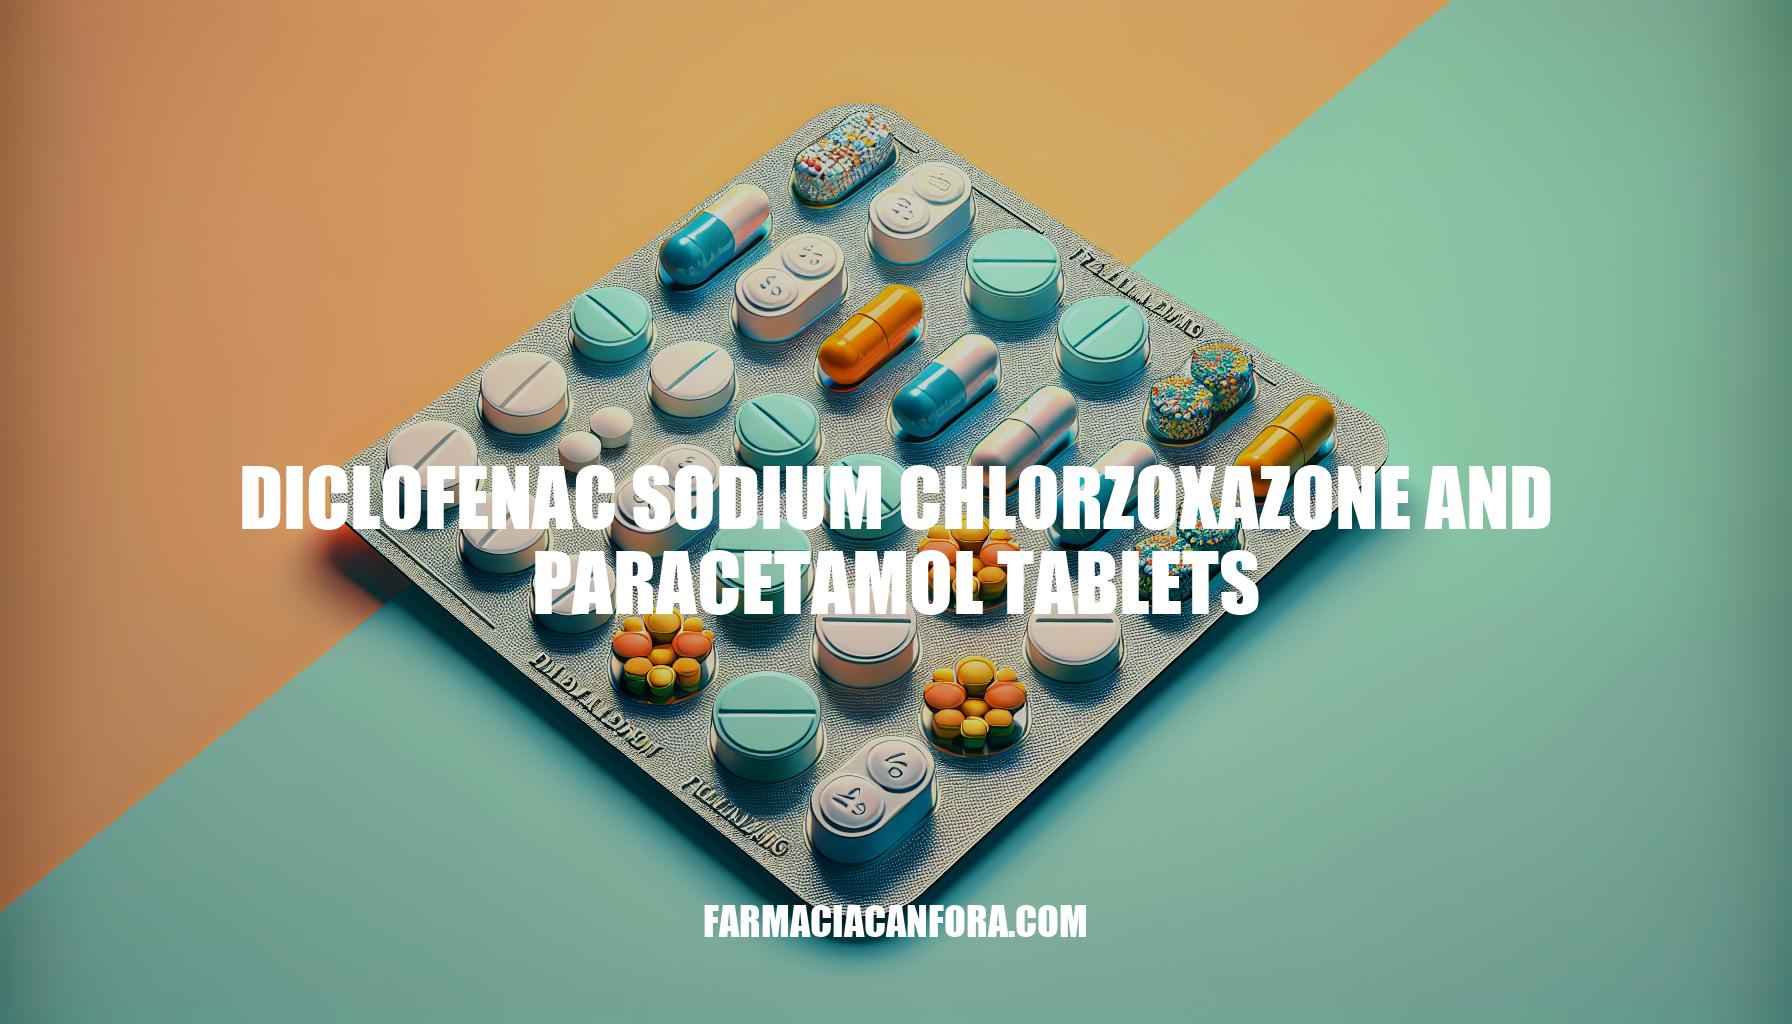 Comprehensive Guide to Diclofenac Sodium Chlorzoxazone and Paracetamol Tablets